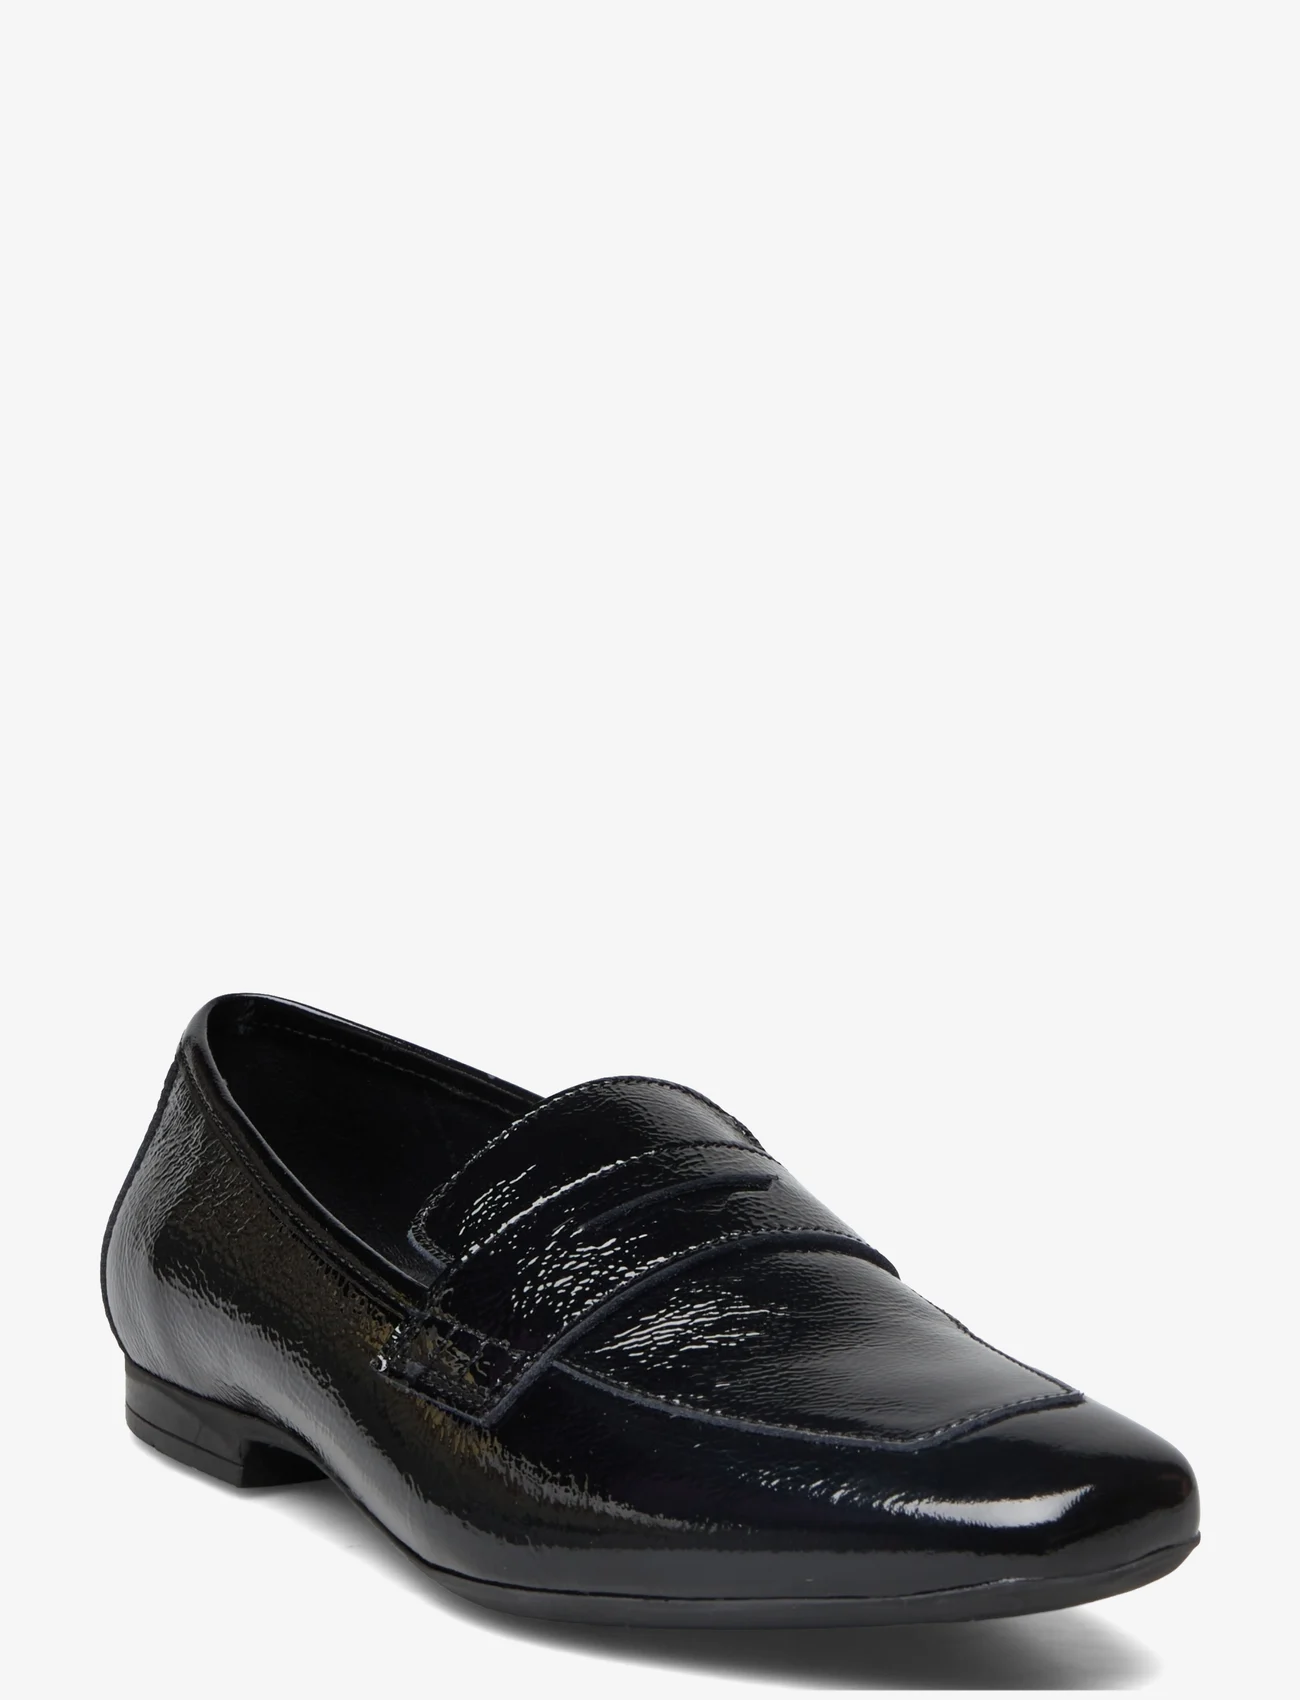 Bianco - BIALILLY Loafer Nappa Lak - loafers - black - 0